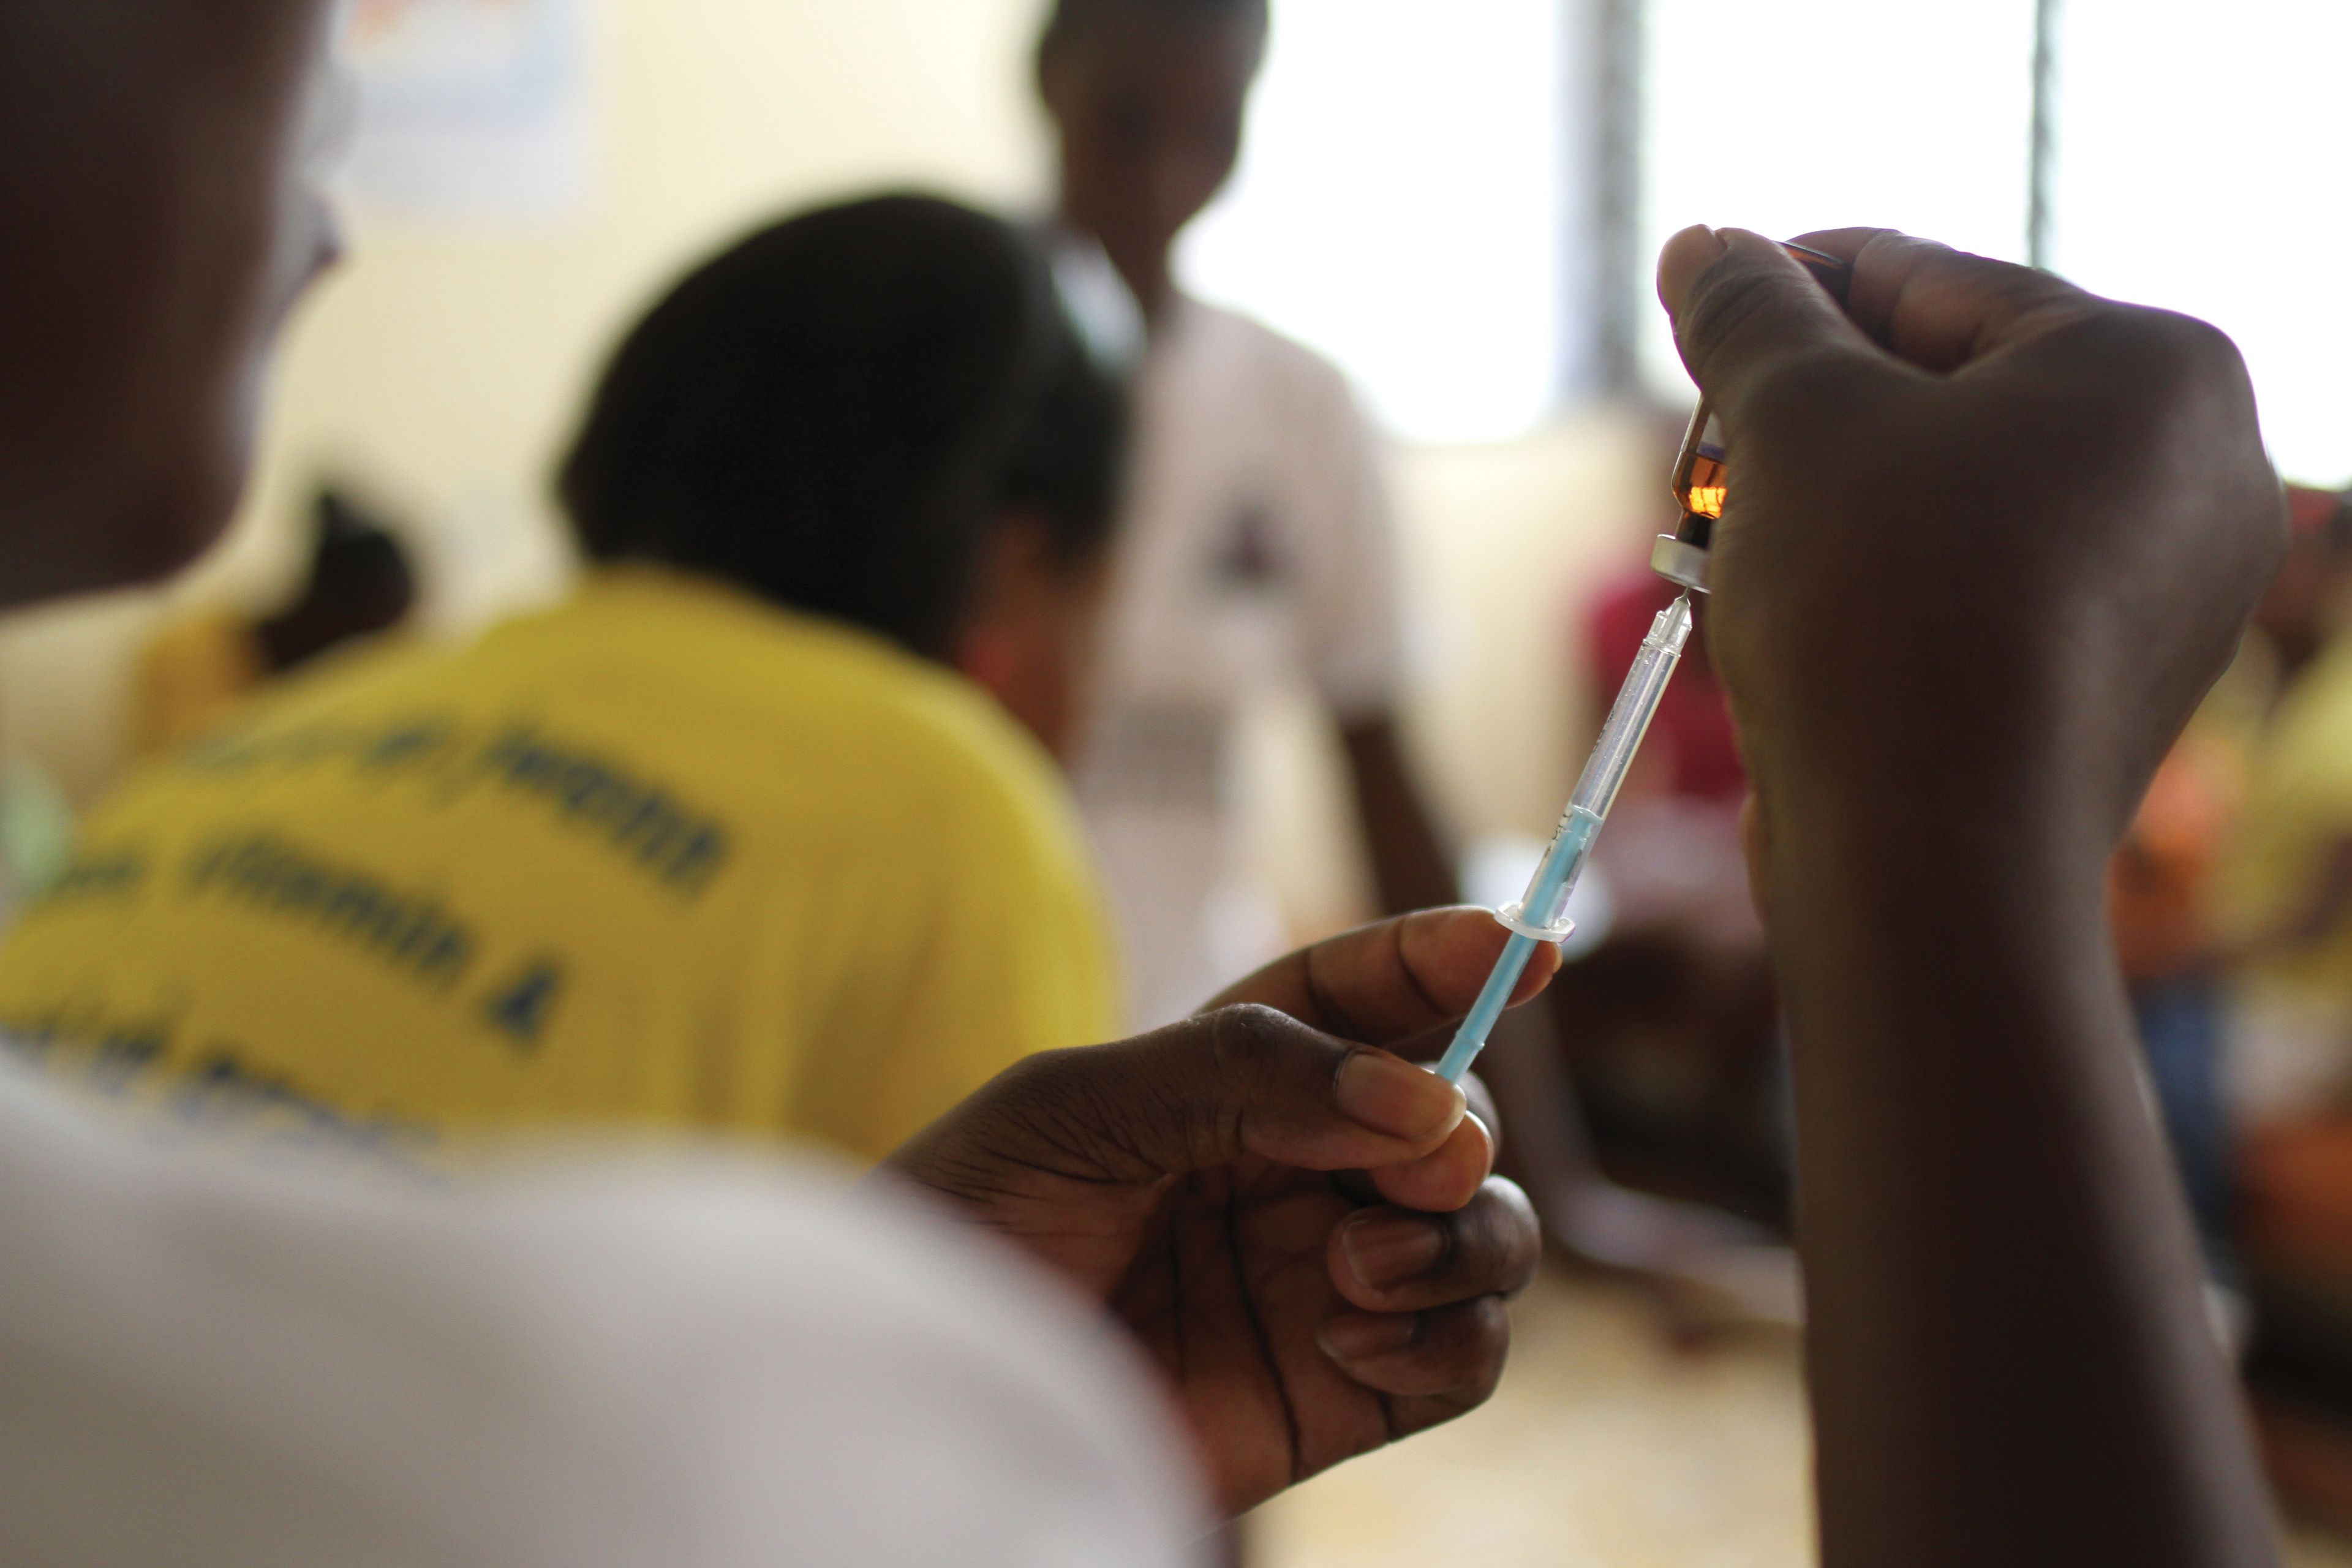 A person in Haiti holding a vaccine bottle while filling a syringe.